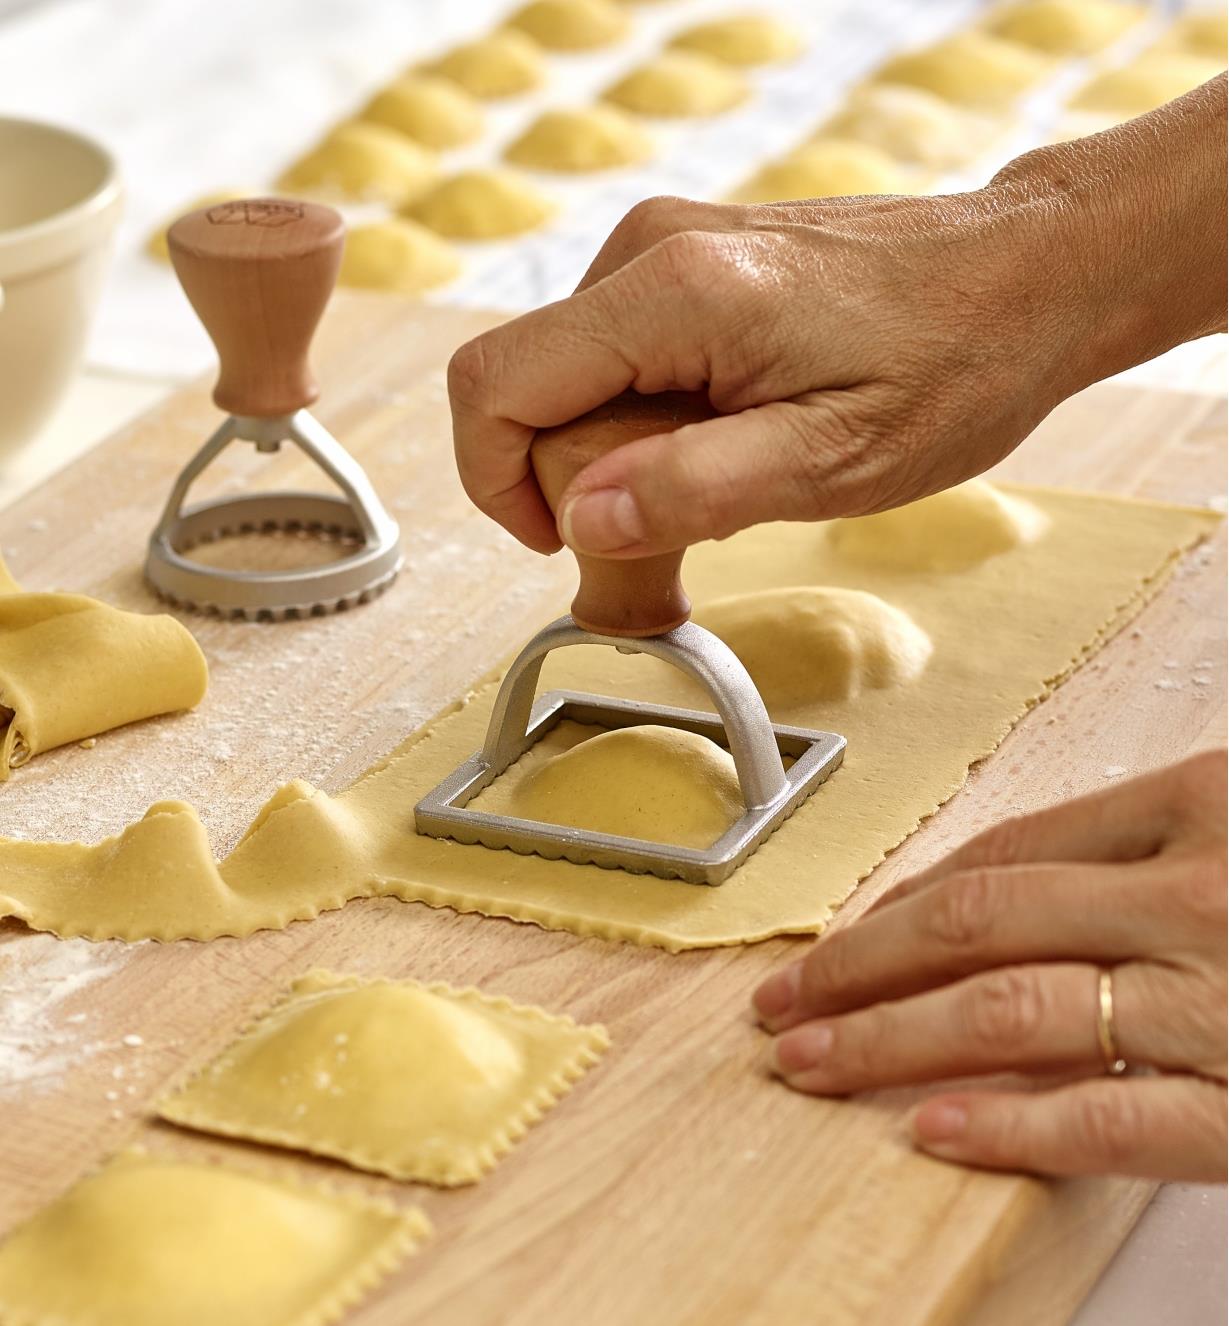 Cutting out ravioli shapes in the kitchen